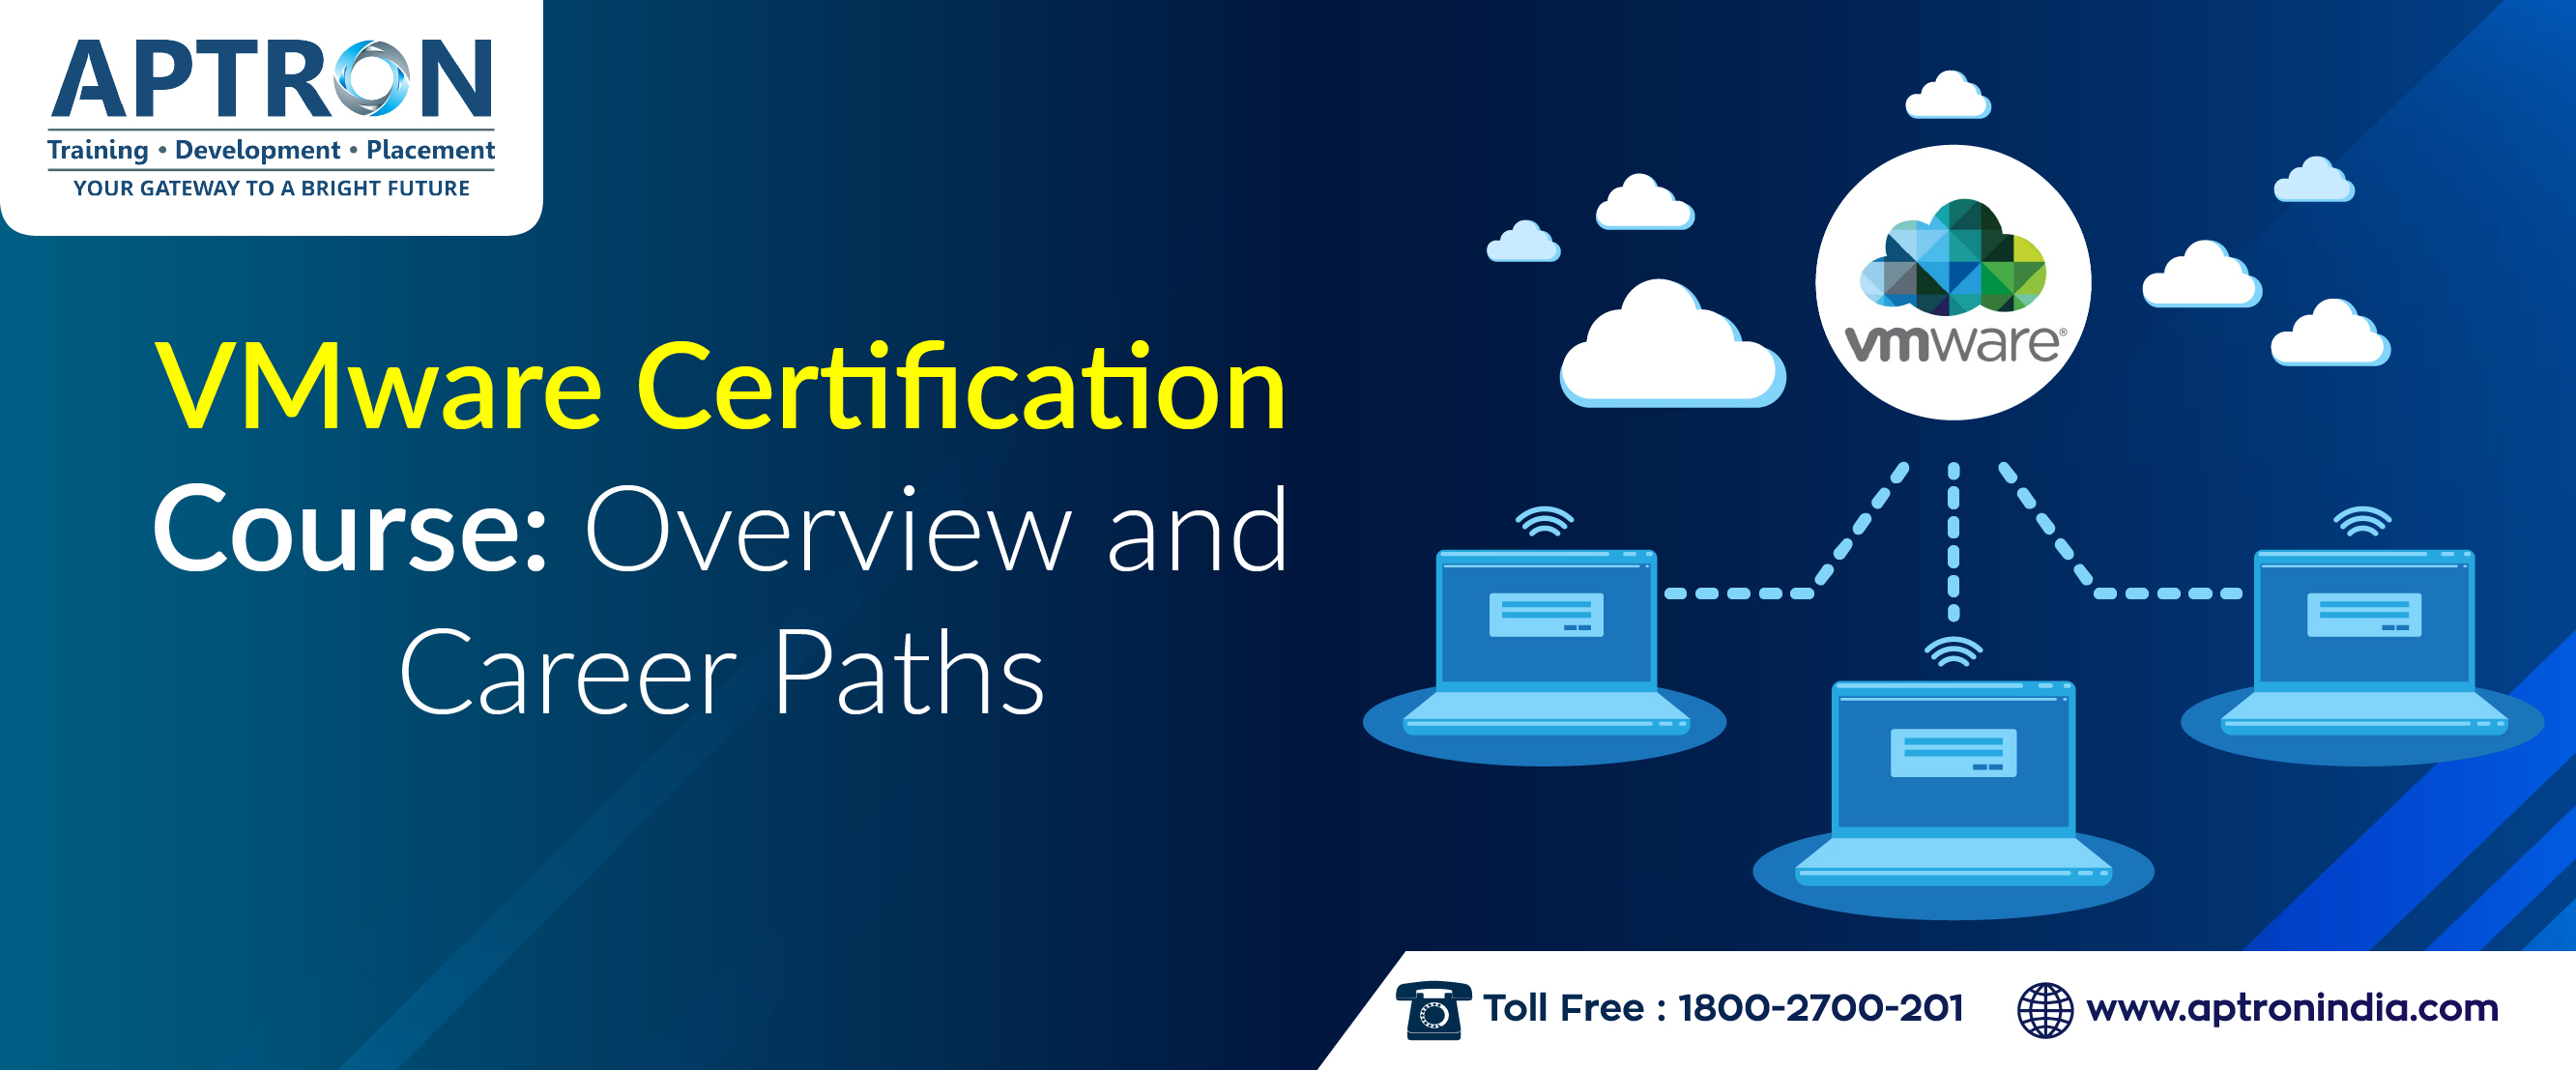 VMware Certification Course Overview and Career Paths